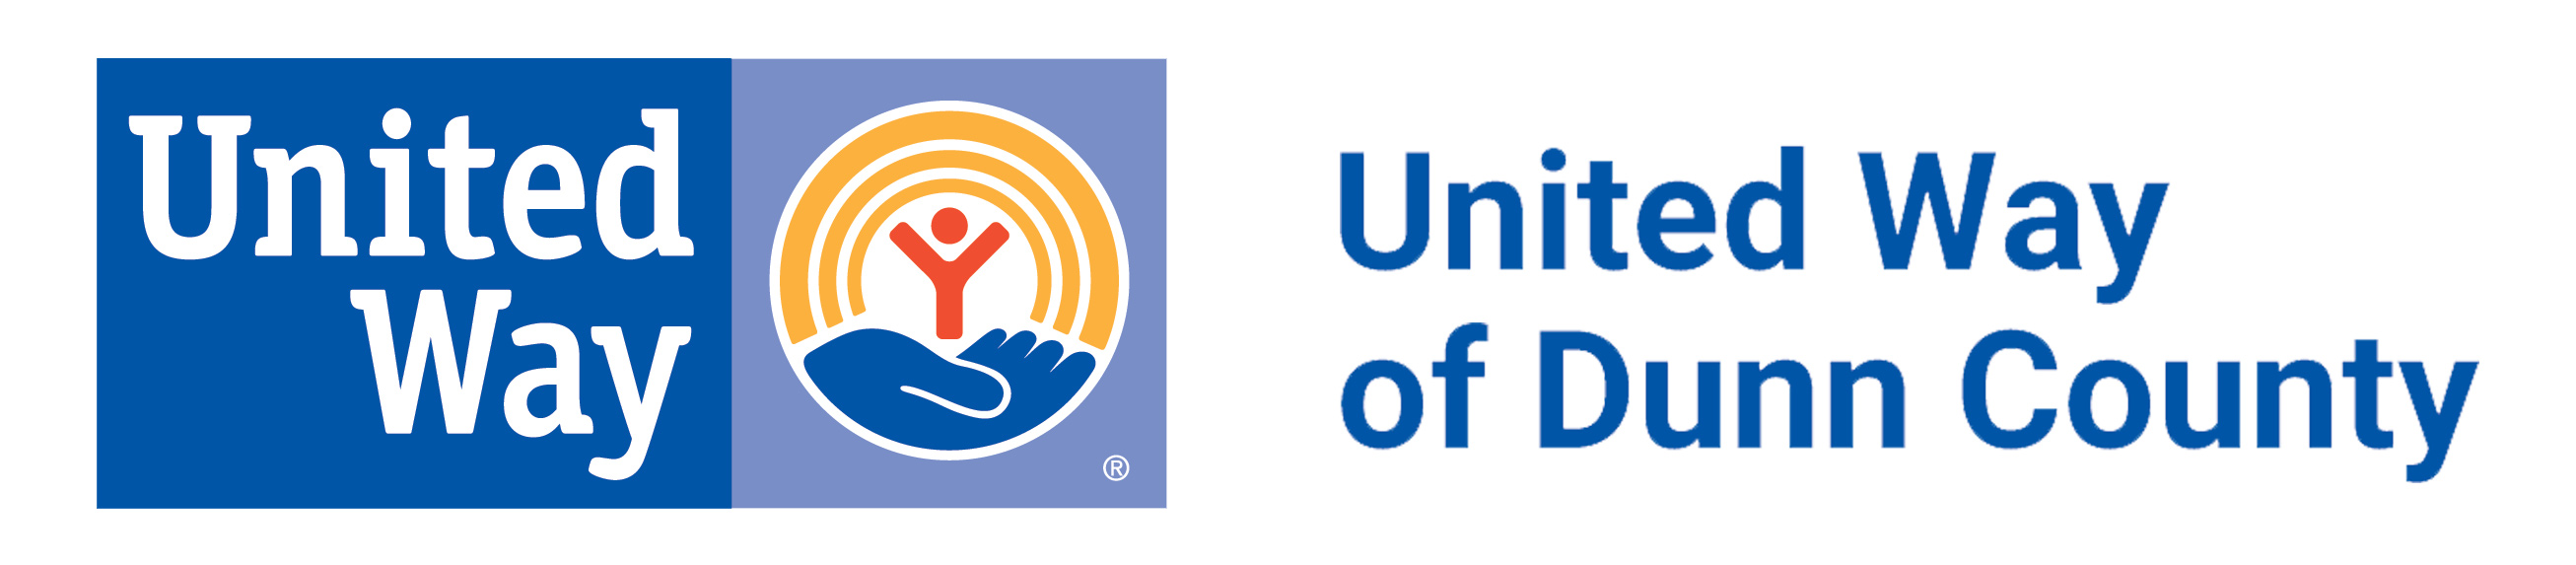 United Way of Dunn County